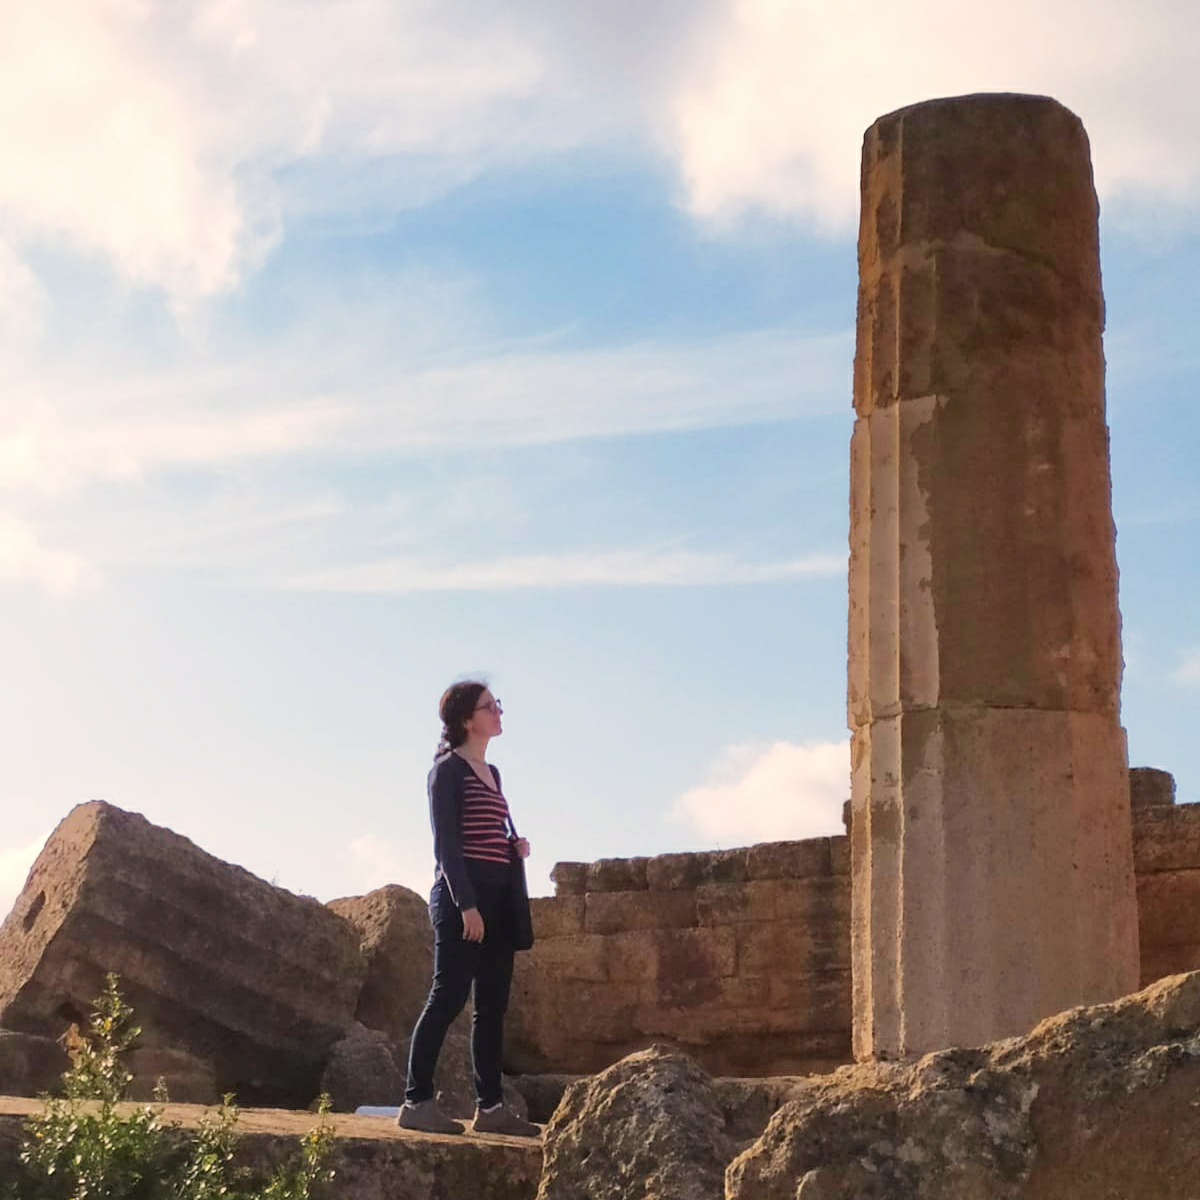 Anne-Sophie standing and looking at Roman ruins in Sicily. Supposed to be funny because the website is in construction. Hahaha.